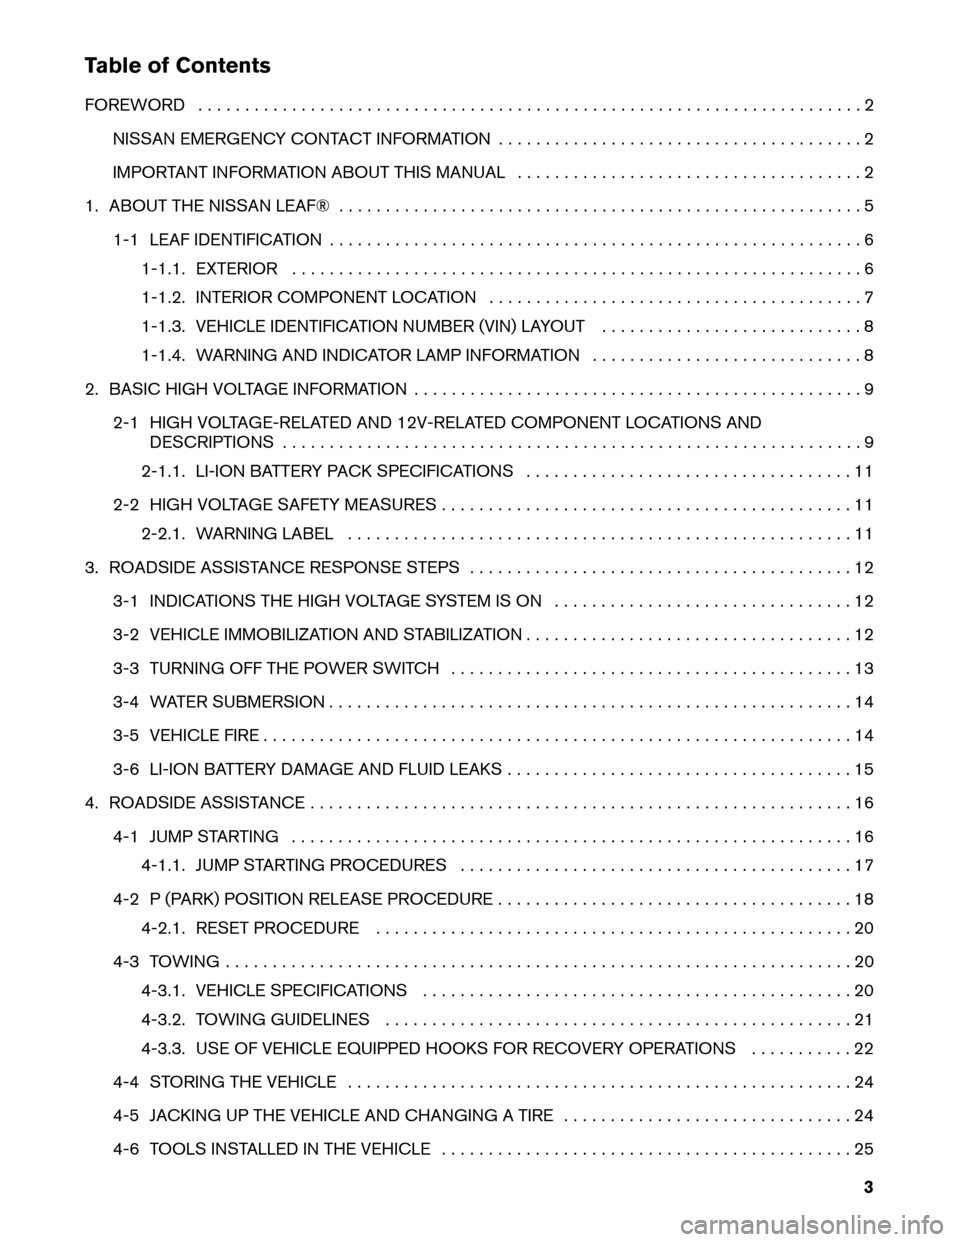 NISSAN LEAF 2013 1.G Roadside Assistance Guide Table of Contents
FOREWORD
. . . . . . . . . . . . . . . . . . . . . . . . . . . . . . . . . . . . . . . . . . . . . . . . . . . . . . . . . . . . . . . . . . . . . . . 2
NISSAN EMERGENCY CONTACT INFO